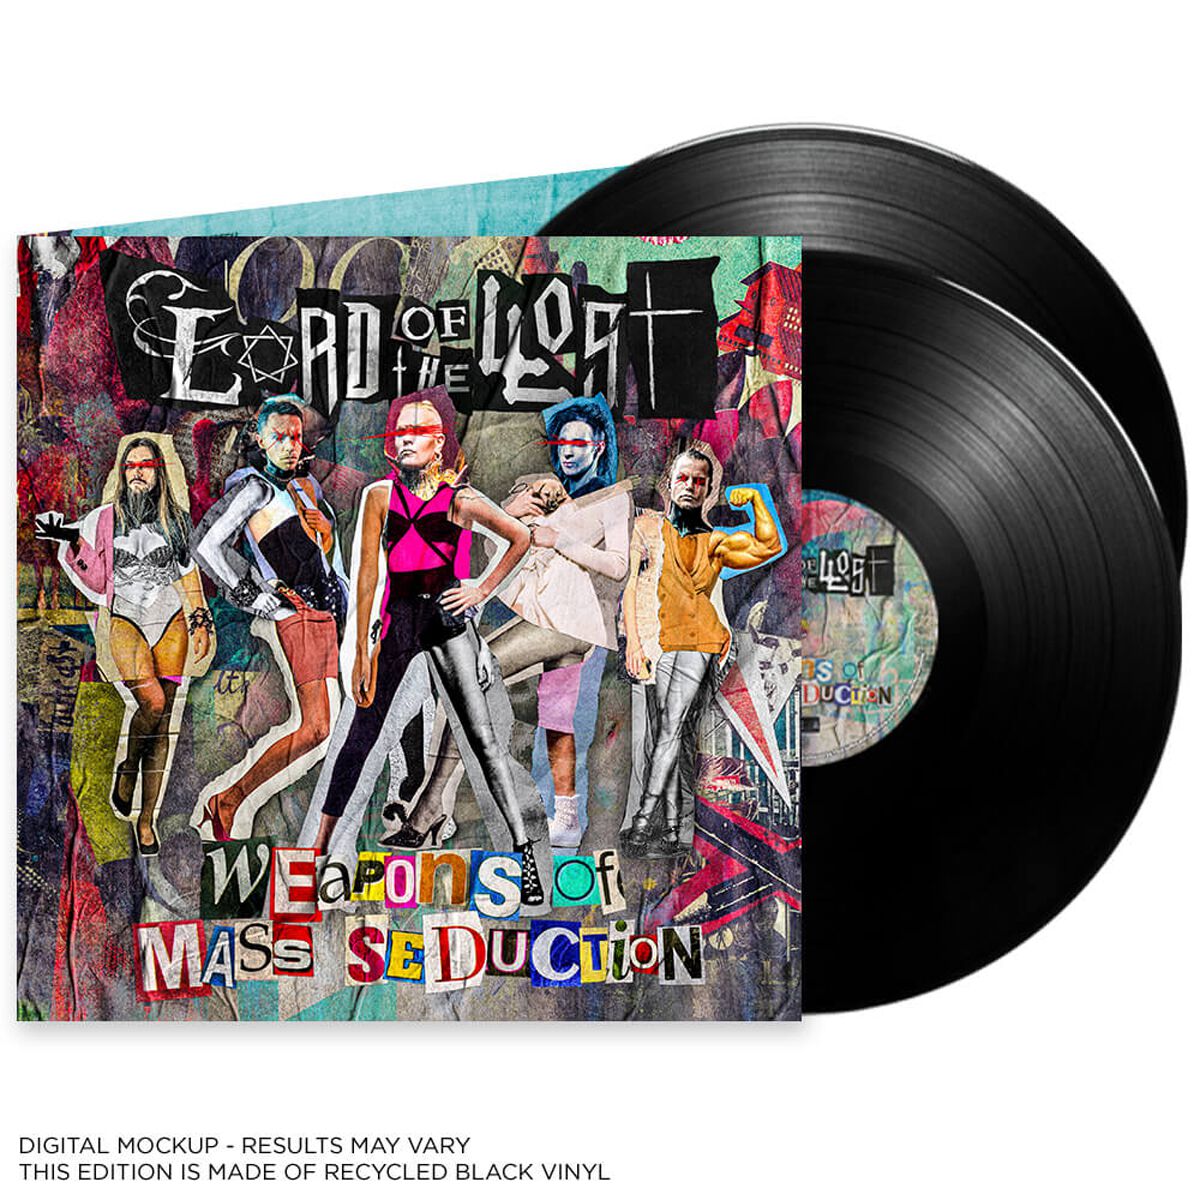 Lord Of The Lost - Weapons of mass seduction - LP - multicolor